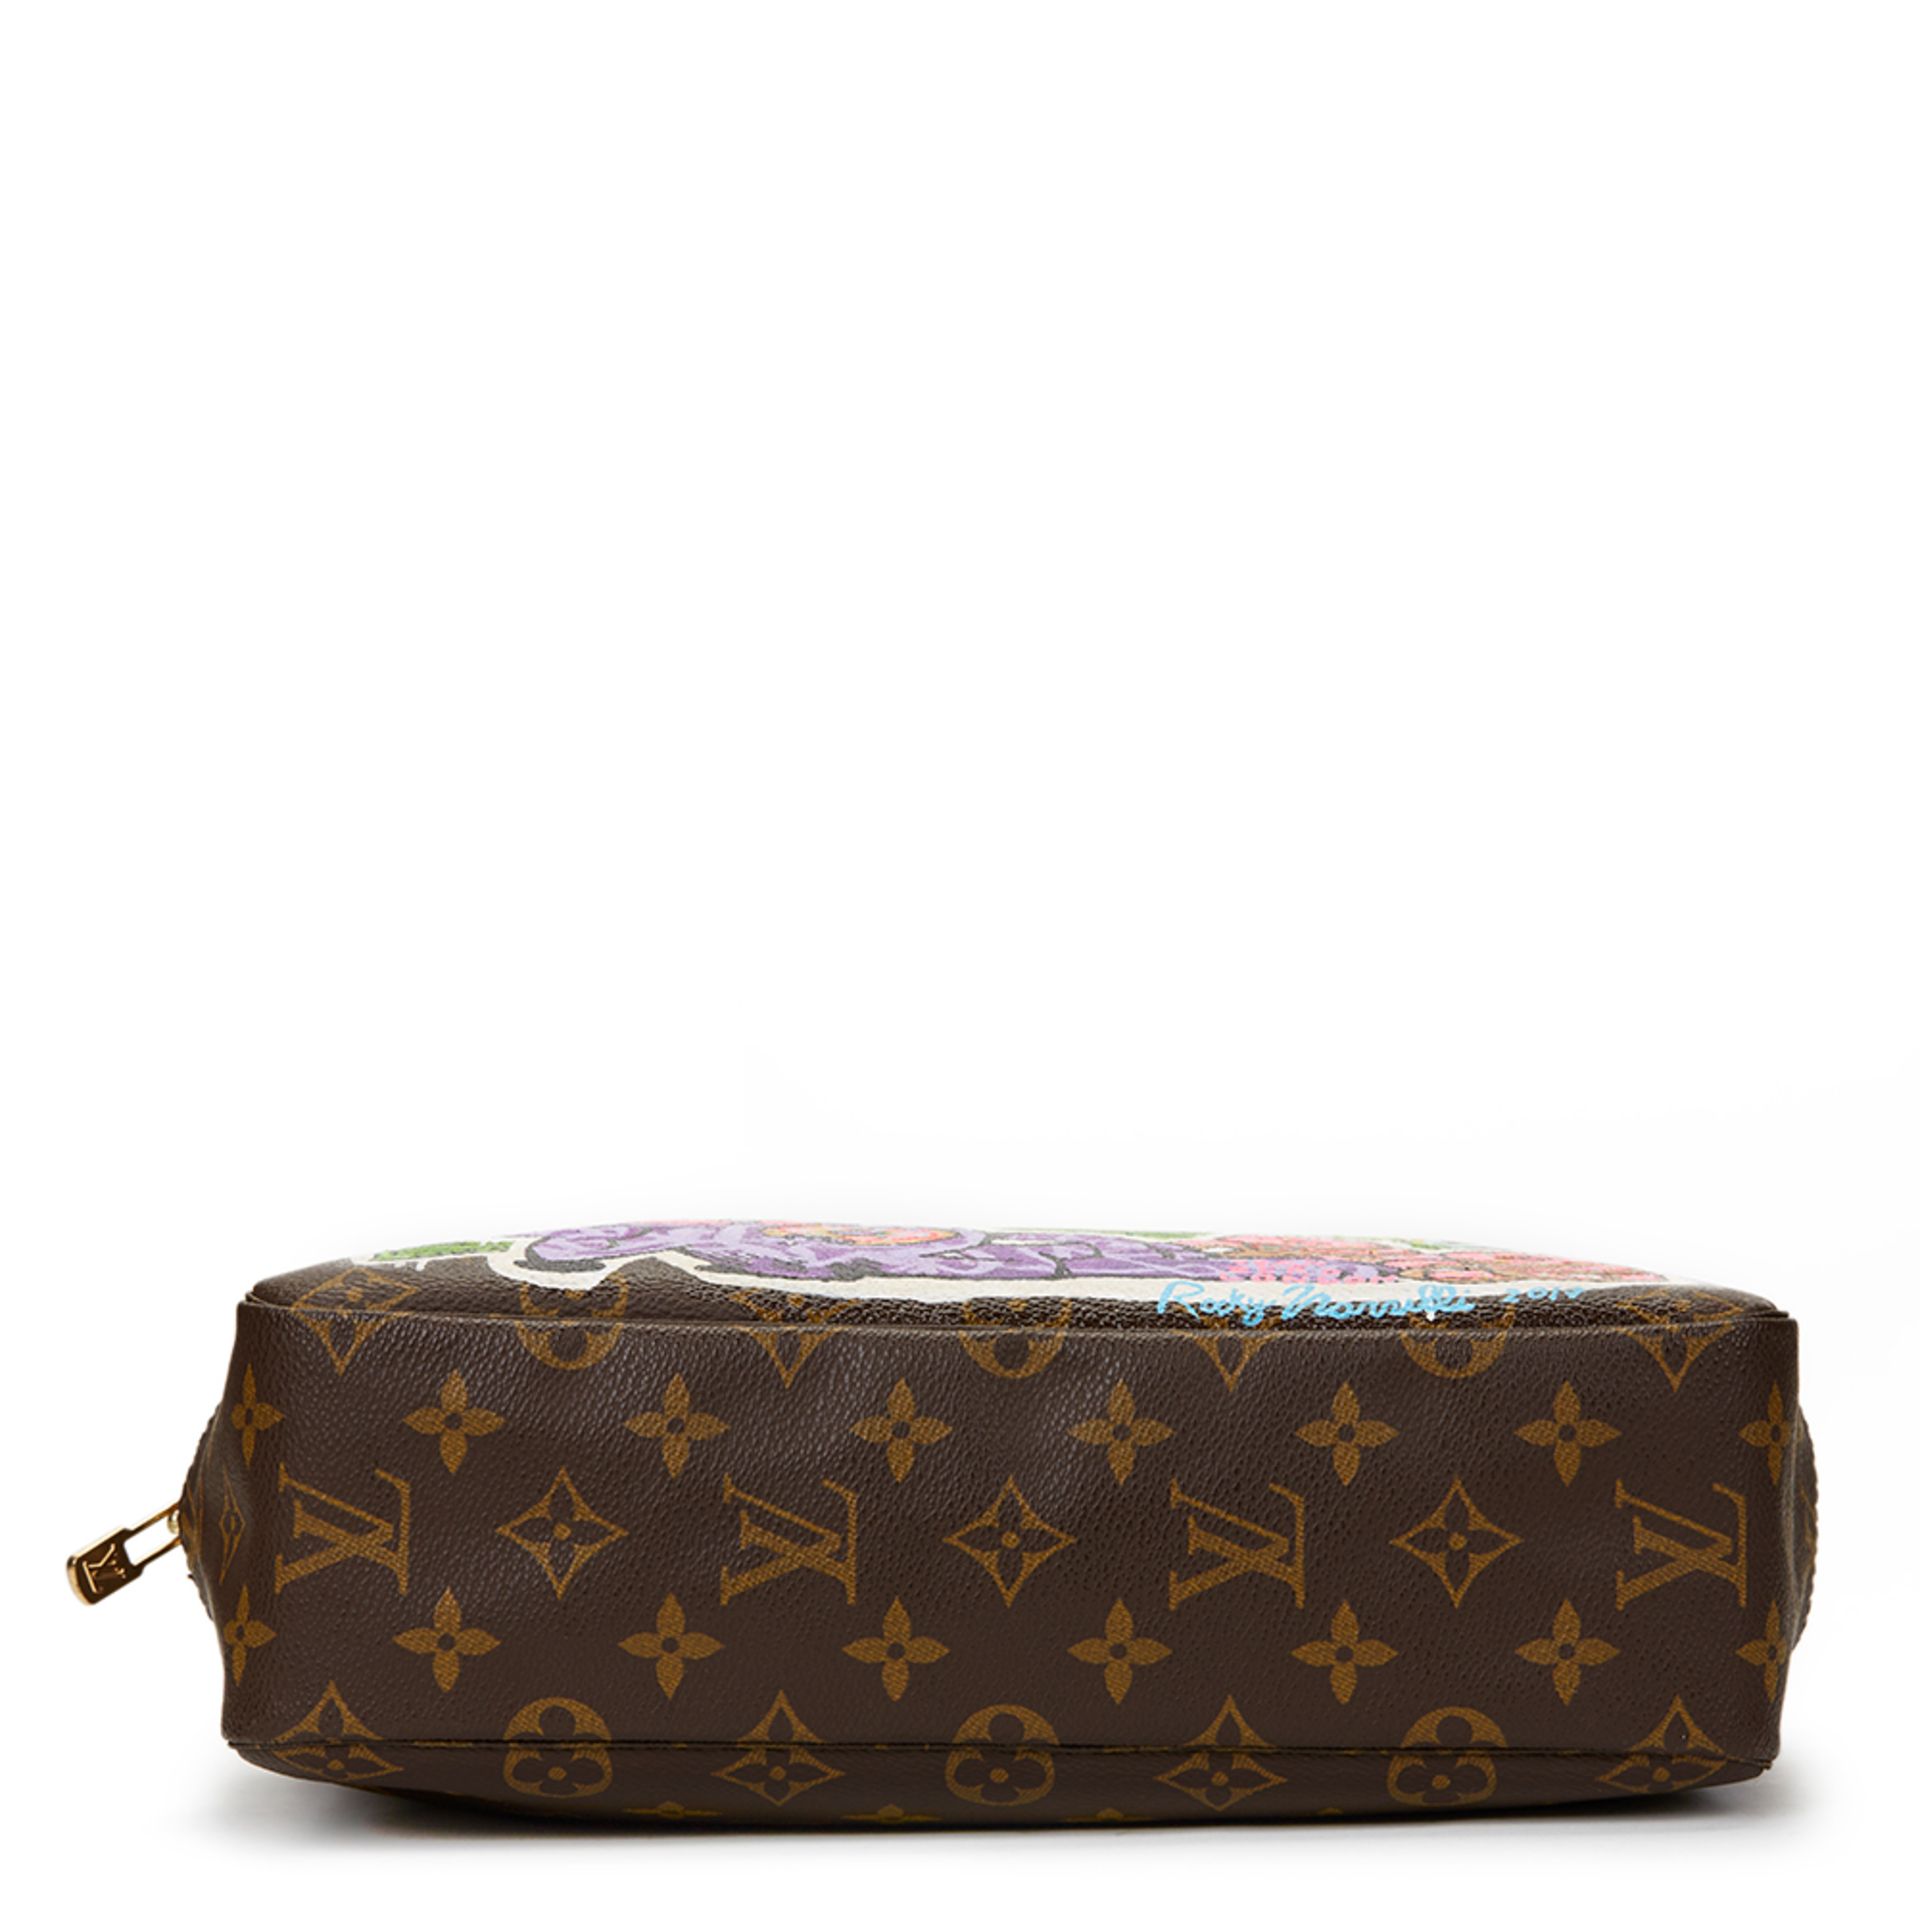 Louis Vuitton Hand-Painted 'Ca$H Me Outside' X Year Zero London Toiletry Pouch - Image 5 of 9